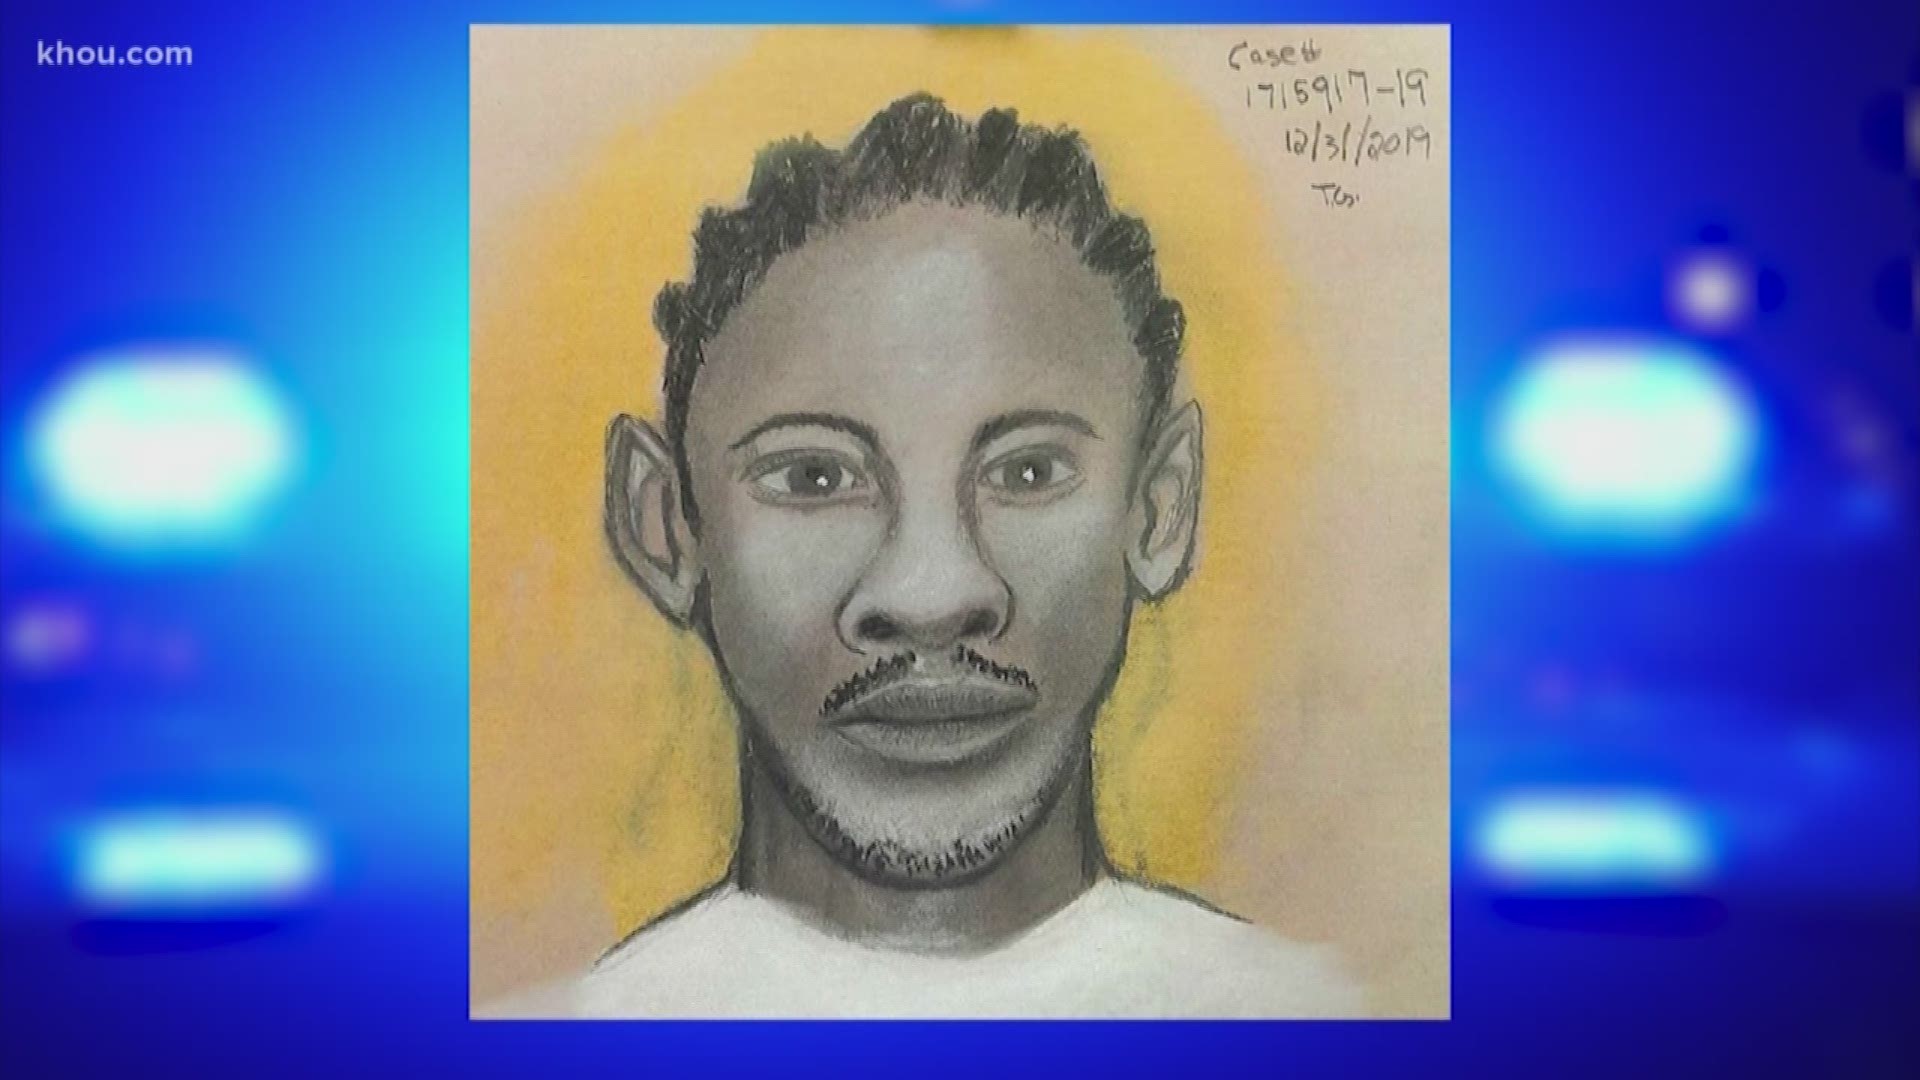 Houston police released a sketch of a man who is being accused of strangling, sexually assaulting and robbing a woman who was walking home along Buffalo Speedway.